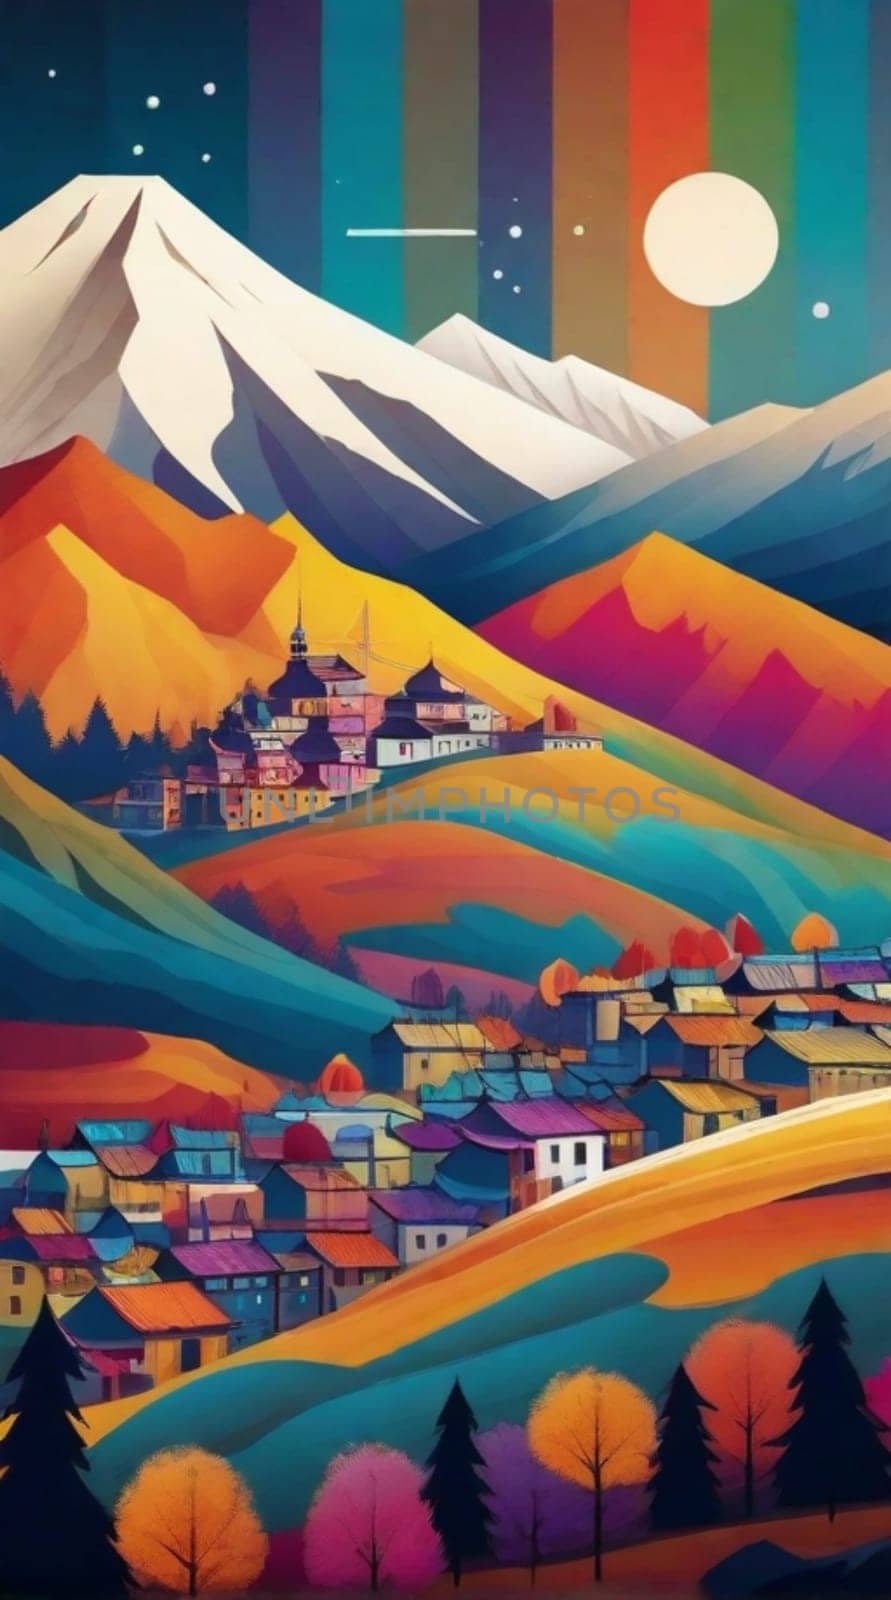 Beautiful and fantastically designed silhouettes of mountain village, houses and moon lited sky by verbano